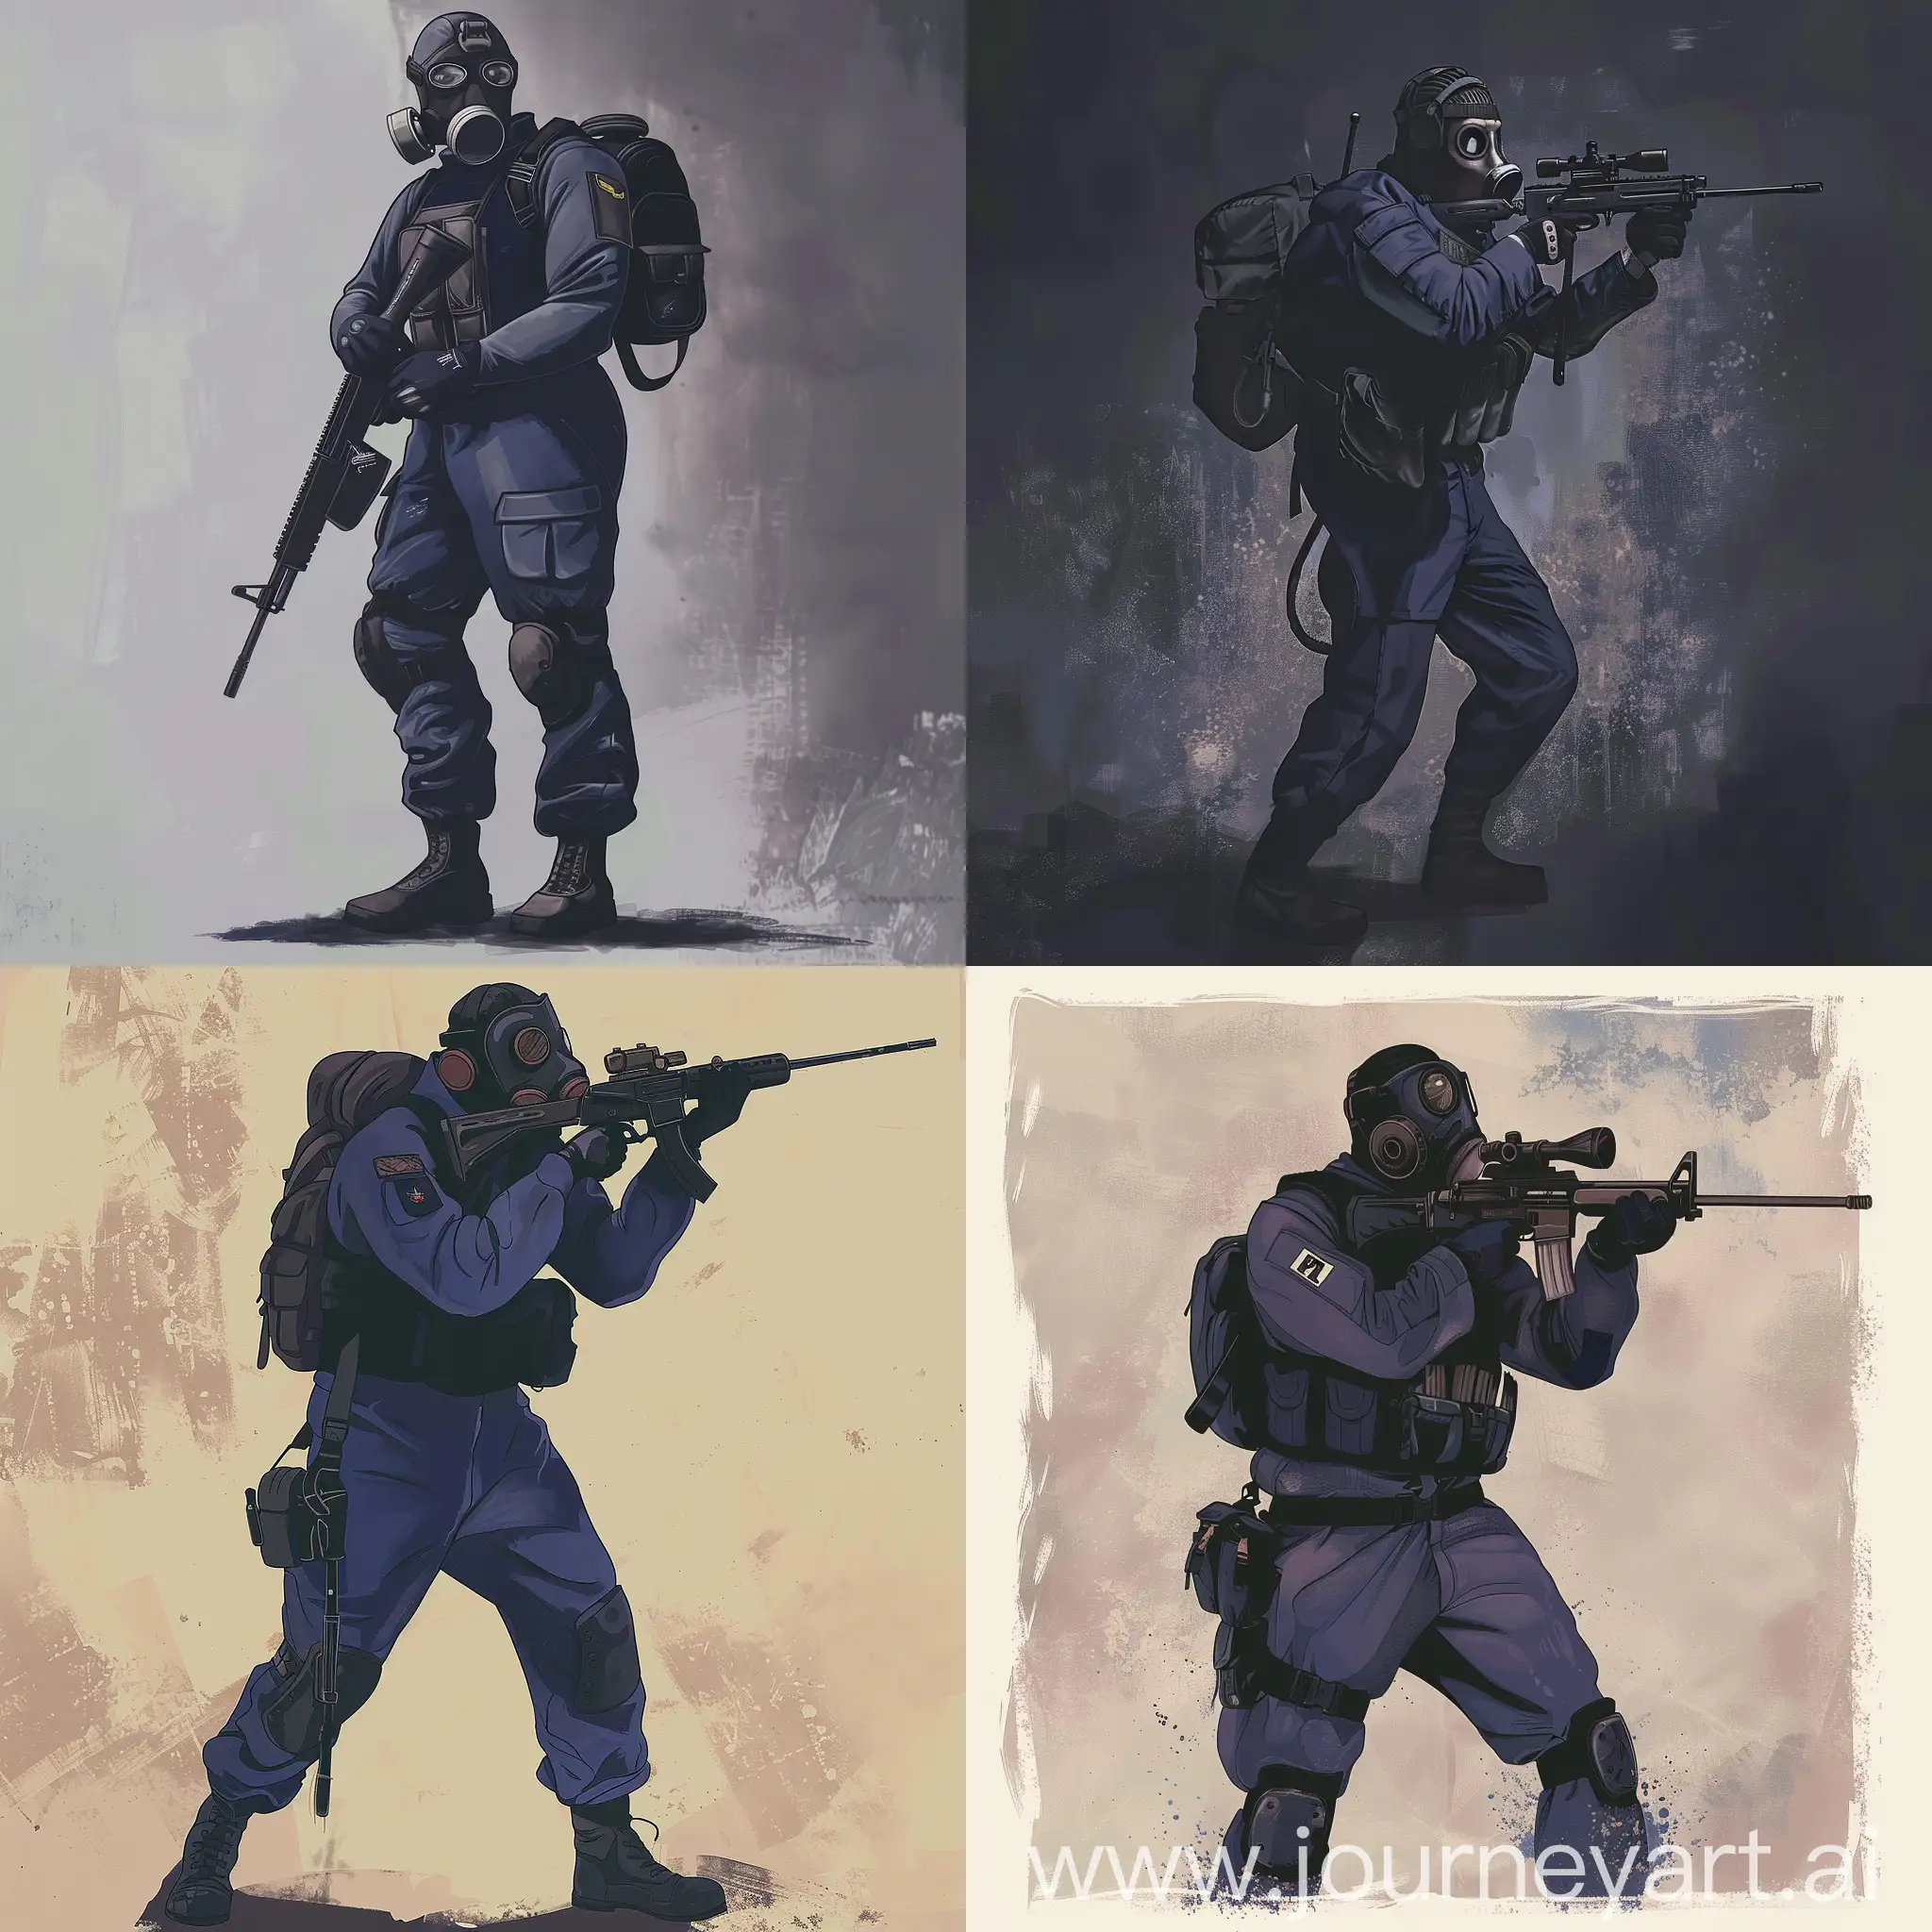 SAS-Operator-in-Dark-Purple-Military-Jumpsuit-with-Sniper-Rifle-and-Gas-Mask